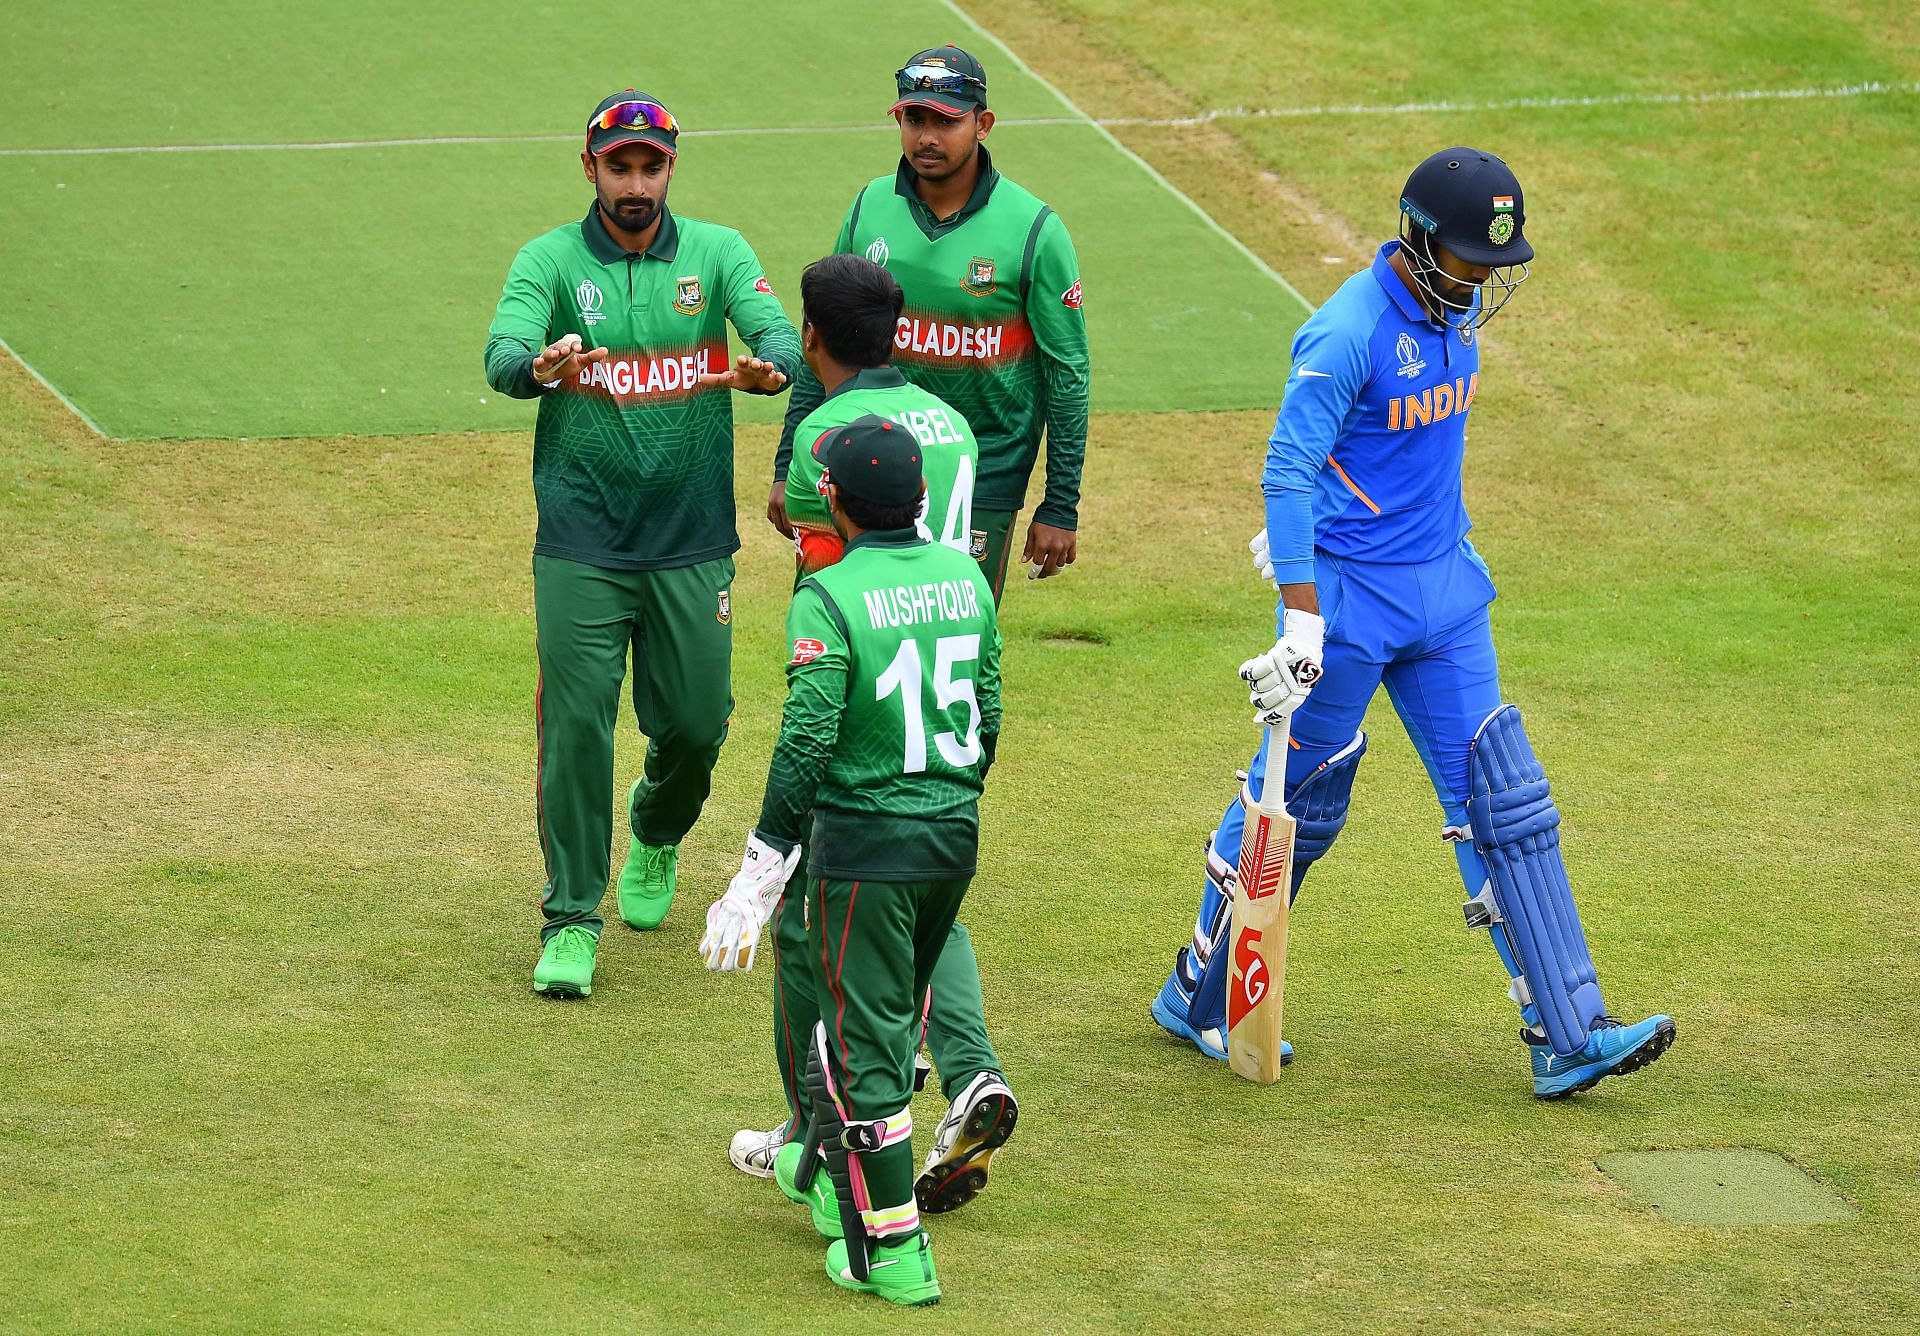 Bangladesh and India were far from their best at the 2021 T20 World Cup